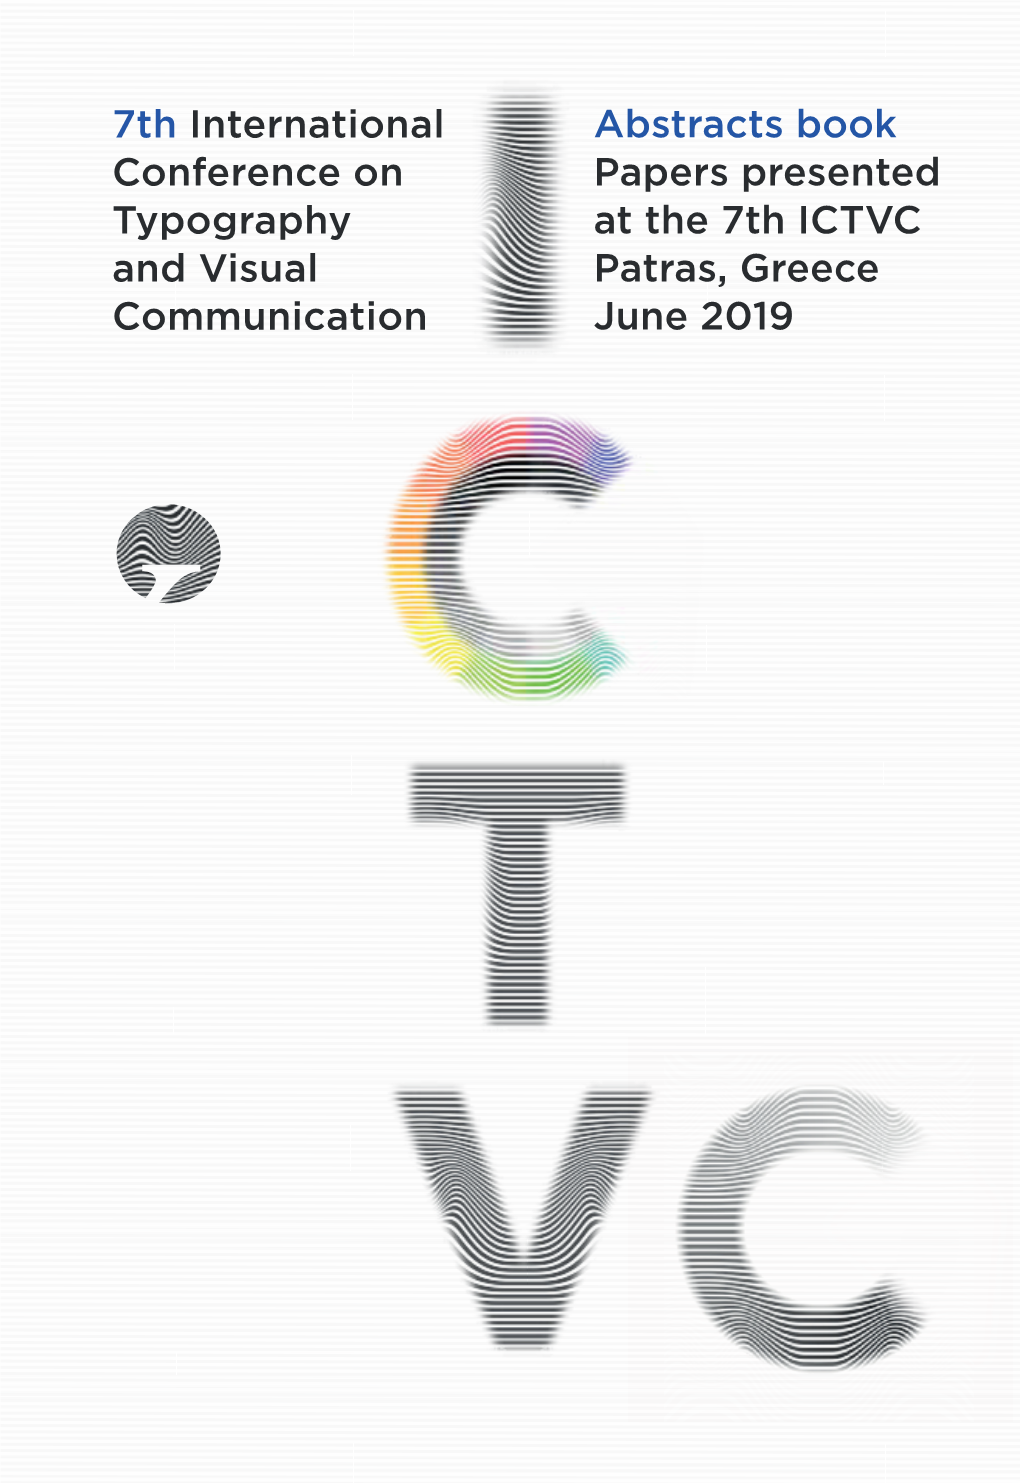 7Th International Conference on Typography and Visual Communication Abstracts Book Papers Presented at the 7Th ICTVC Patras